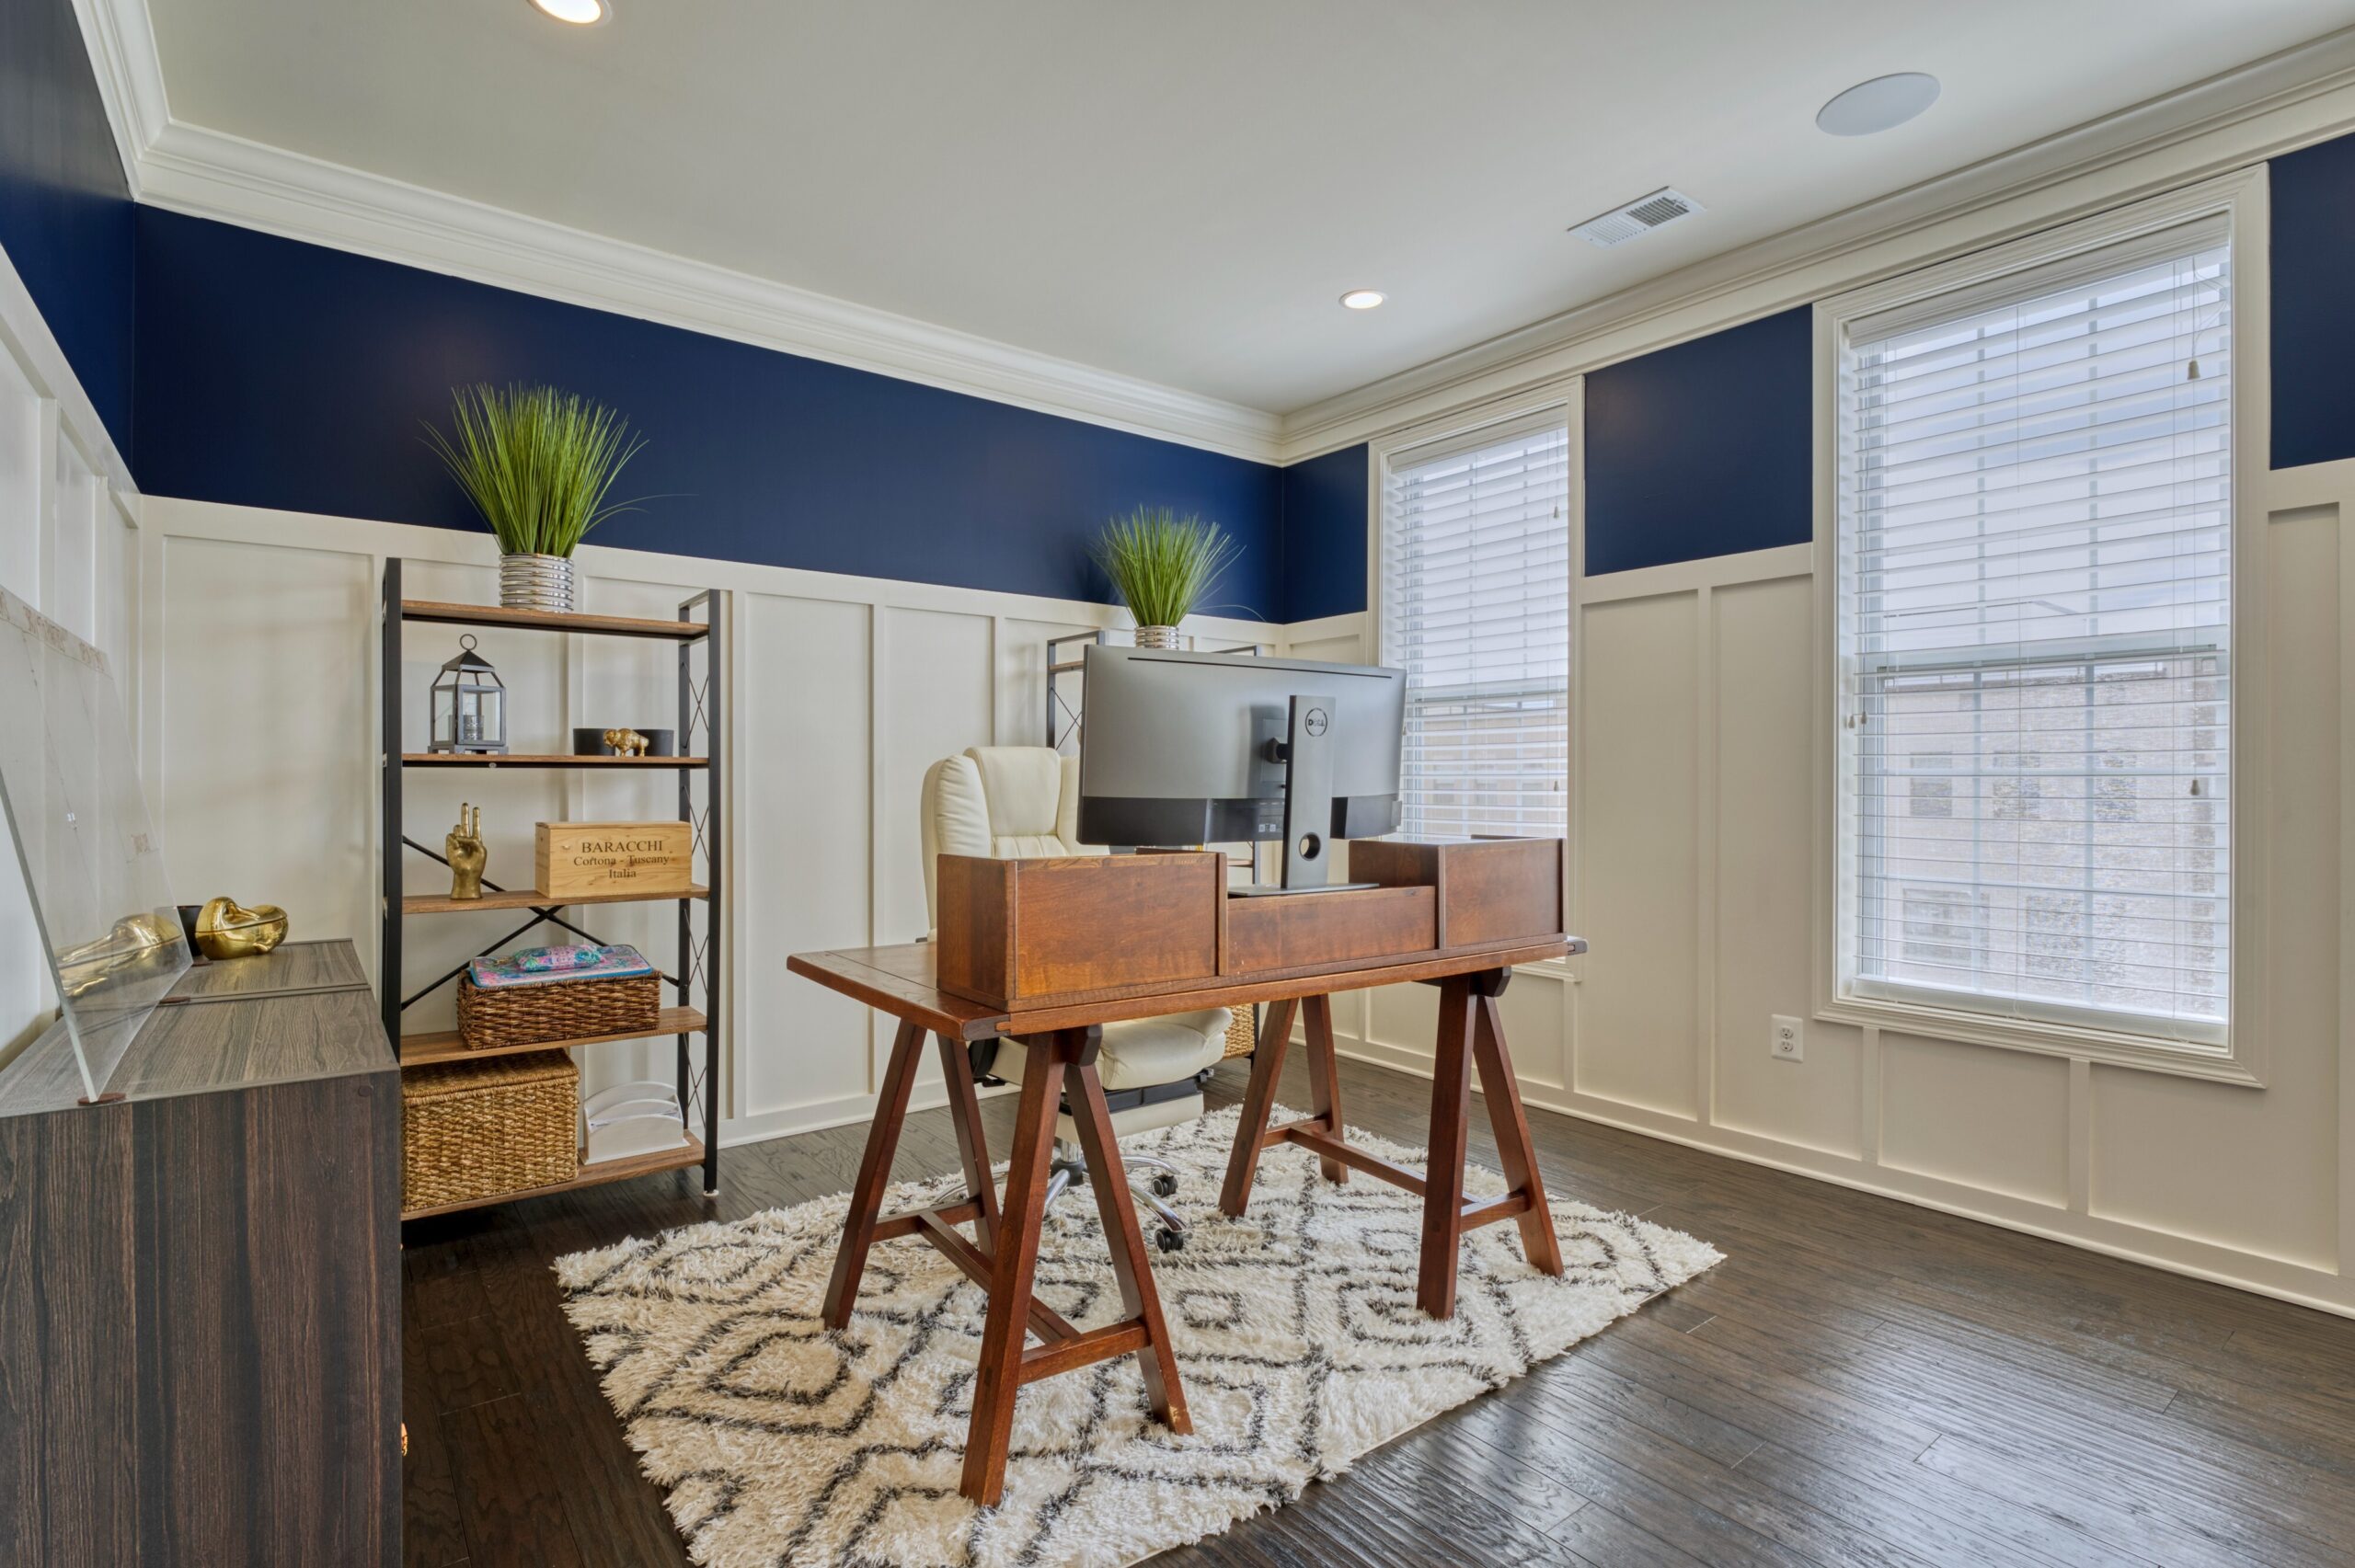 Professional interior photo of 23560 Buckland Farm Ter, Ashburn, VA - Showing the open office room with white wainscoting against white walls bordered by deep blue around the top third of the wall over the wainscoting